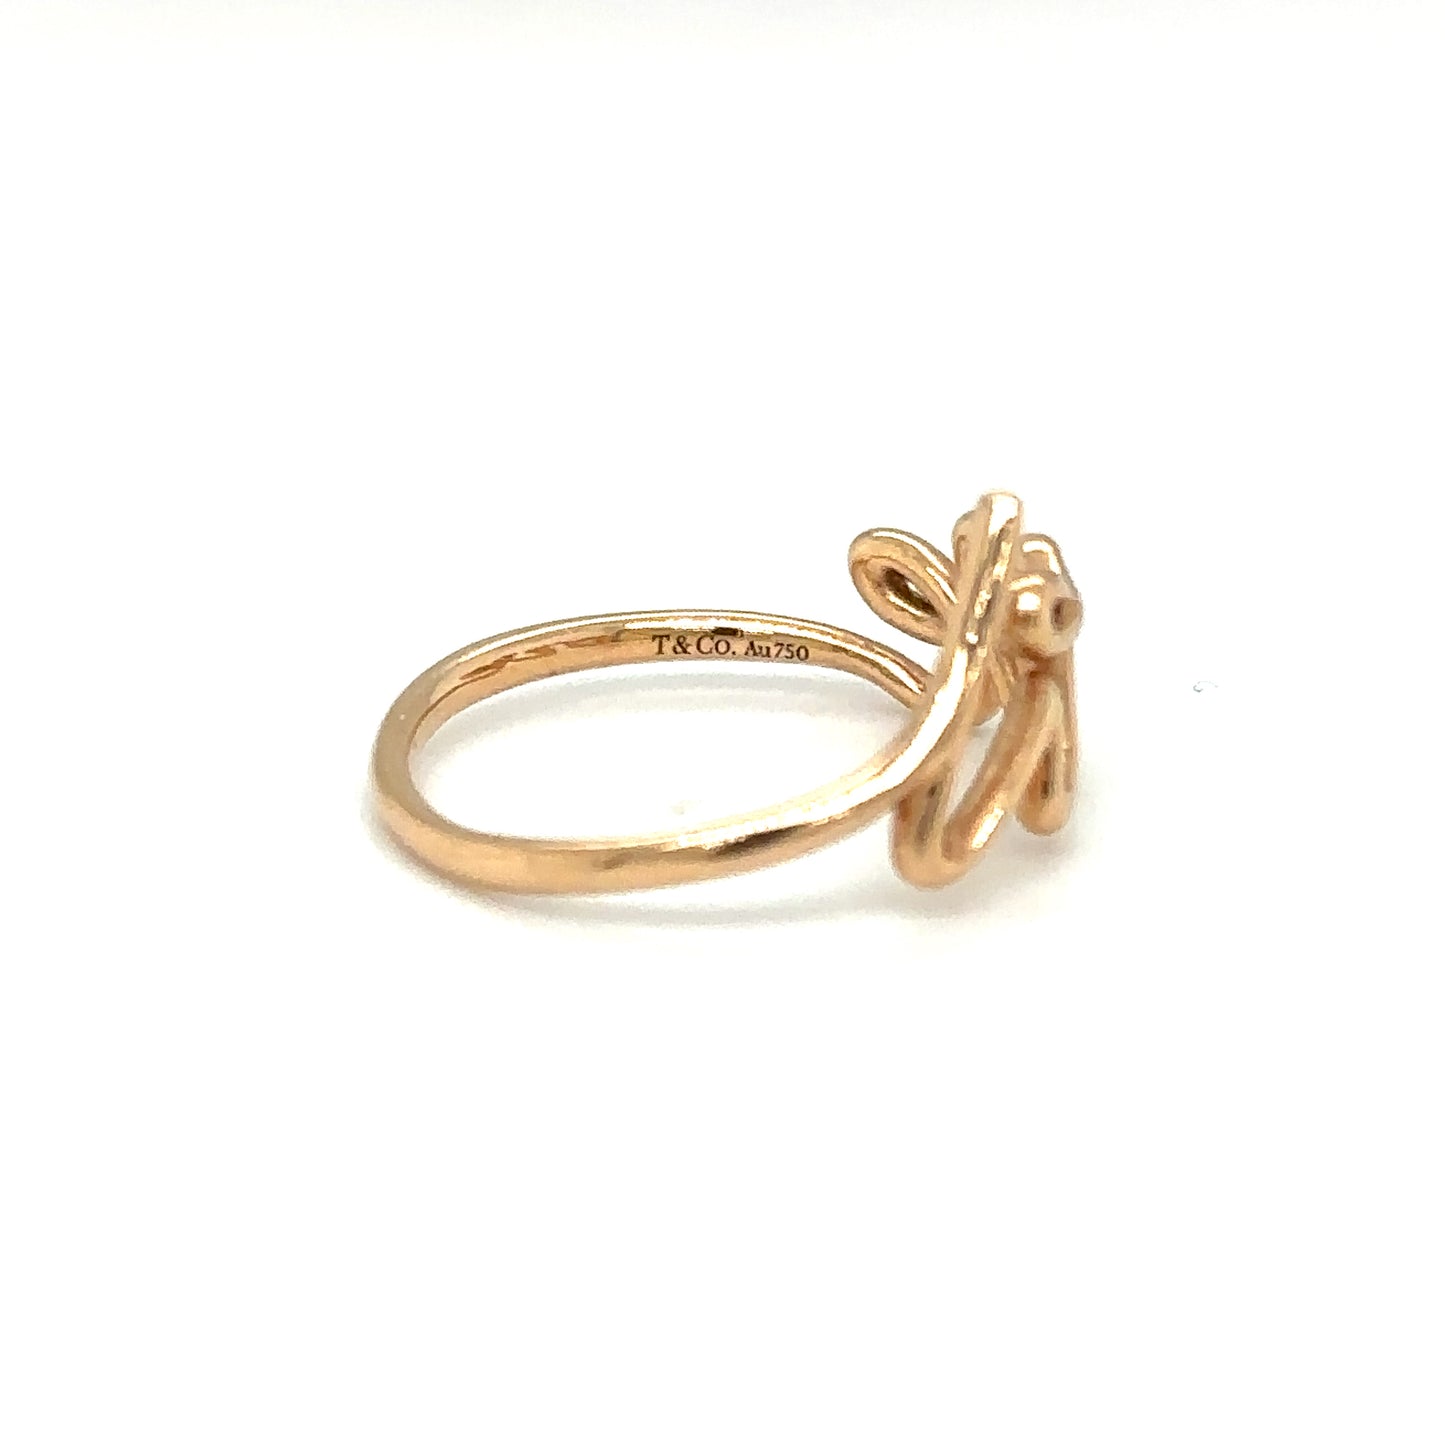 Tiffany & Co. Paloma Picasso "Love" Ring in 18K Rose Gold